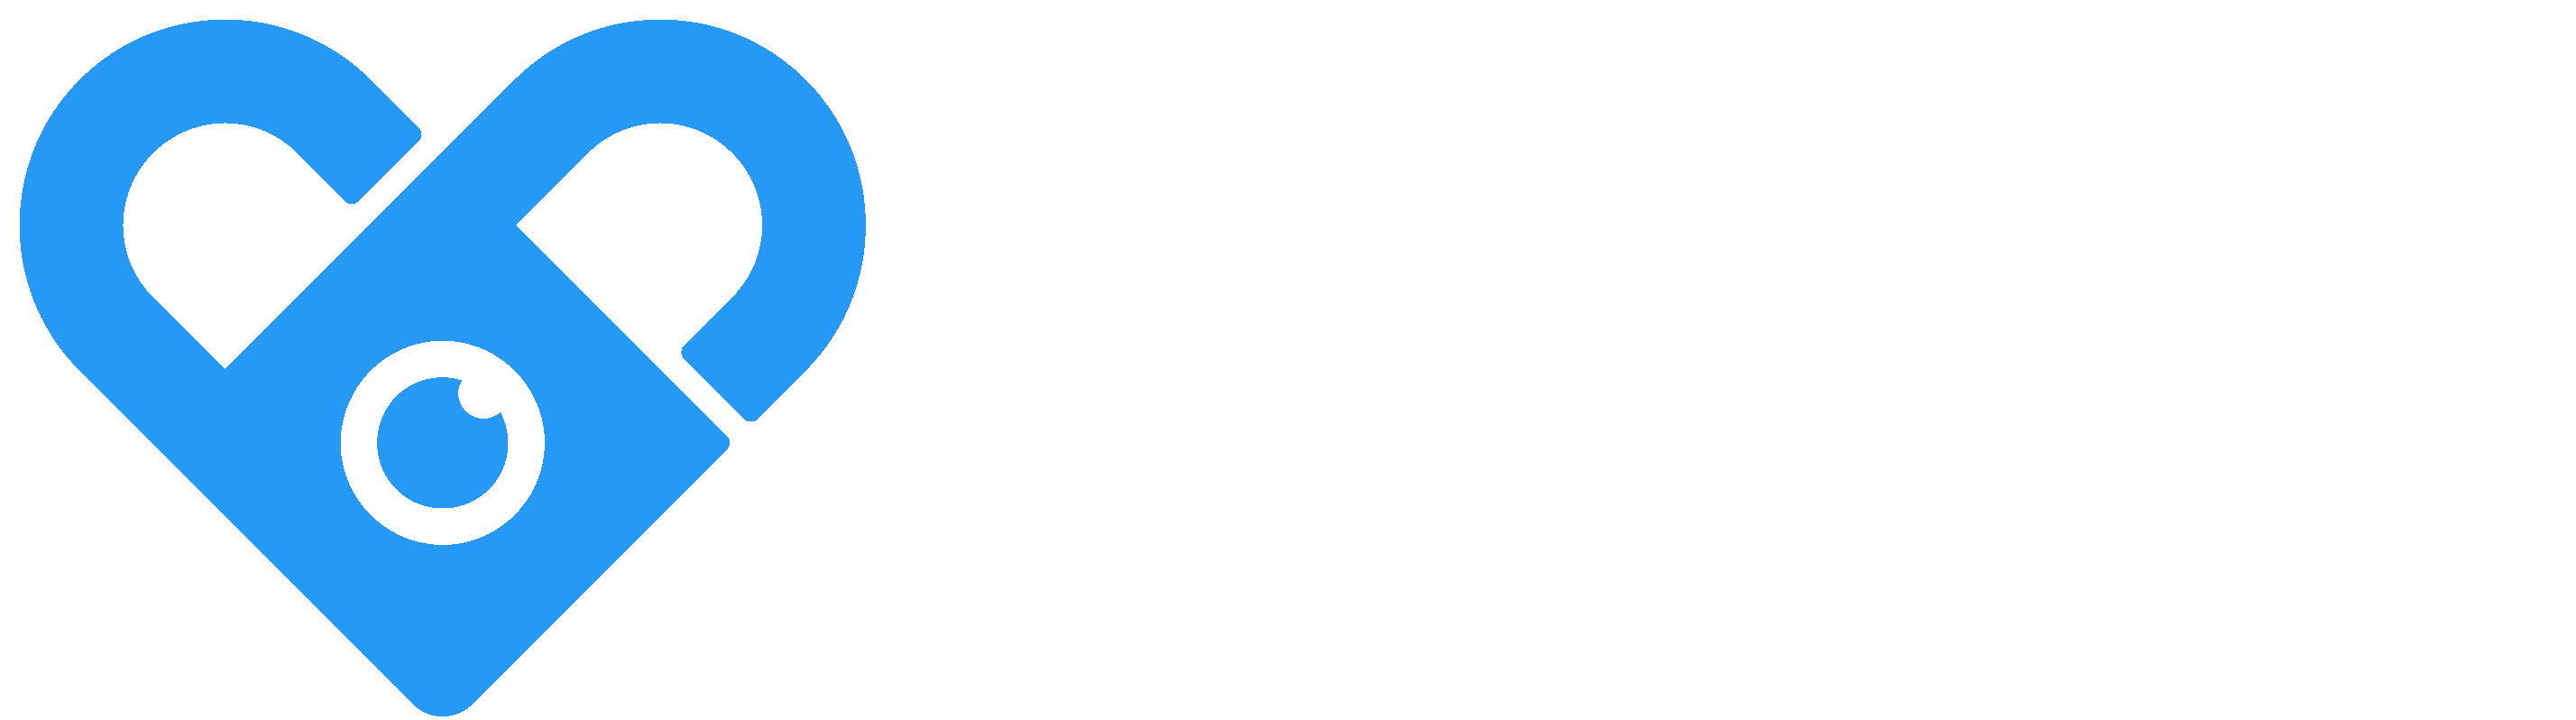 Fansly – Free Leaked Fansly , Onlyfans, ASMR, Patreon, Snapchat, Cosplay, Twitch, Celebrity, Youtube, Images & Videos, Porn Tube